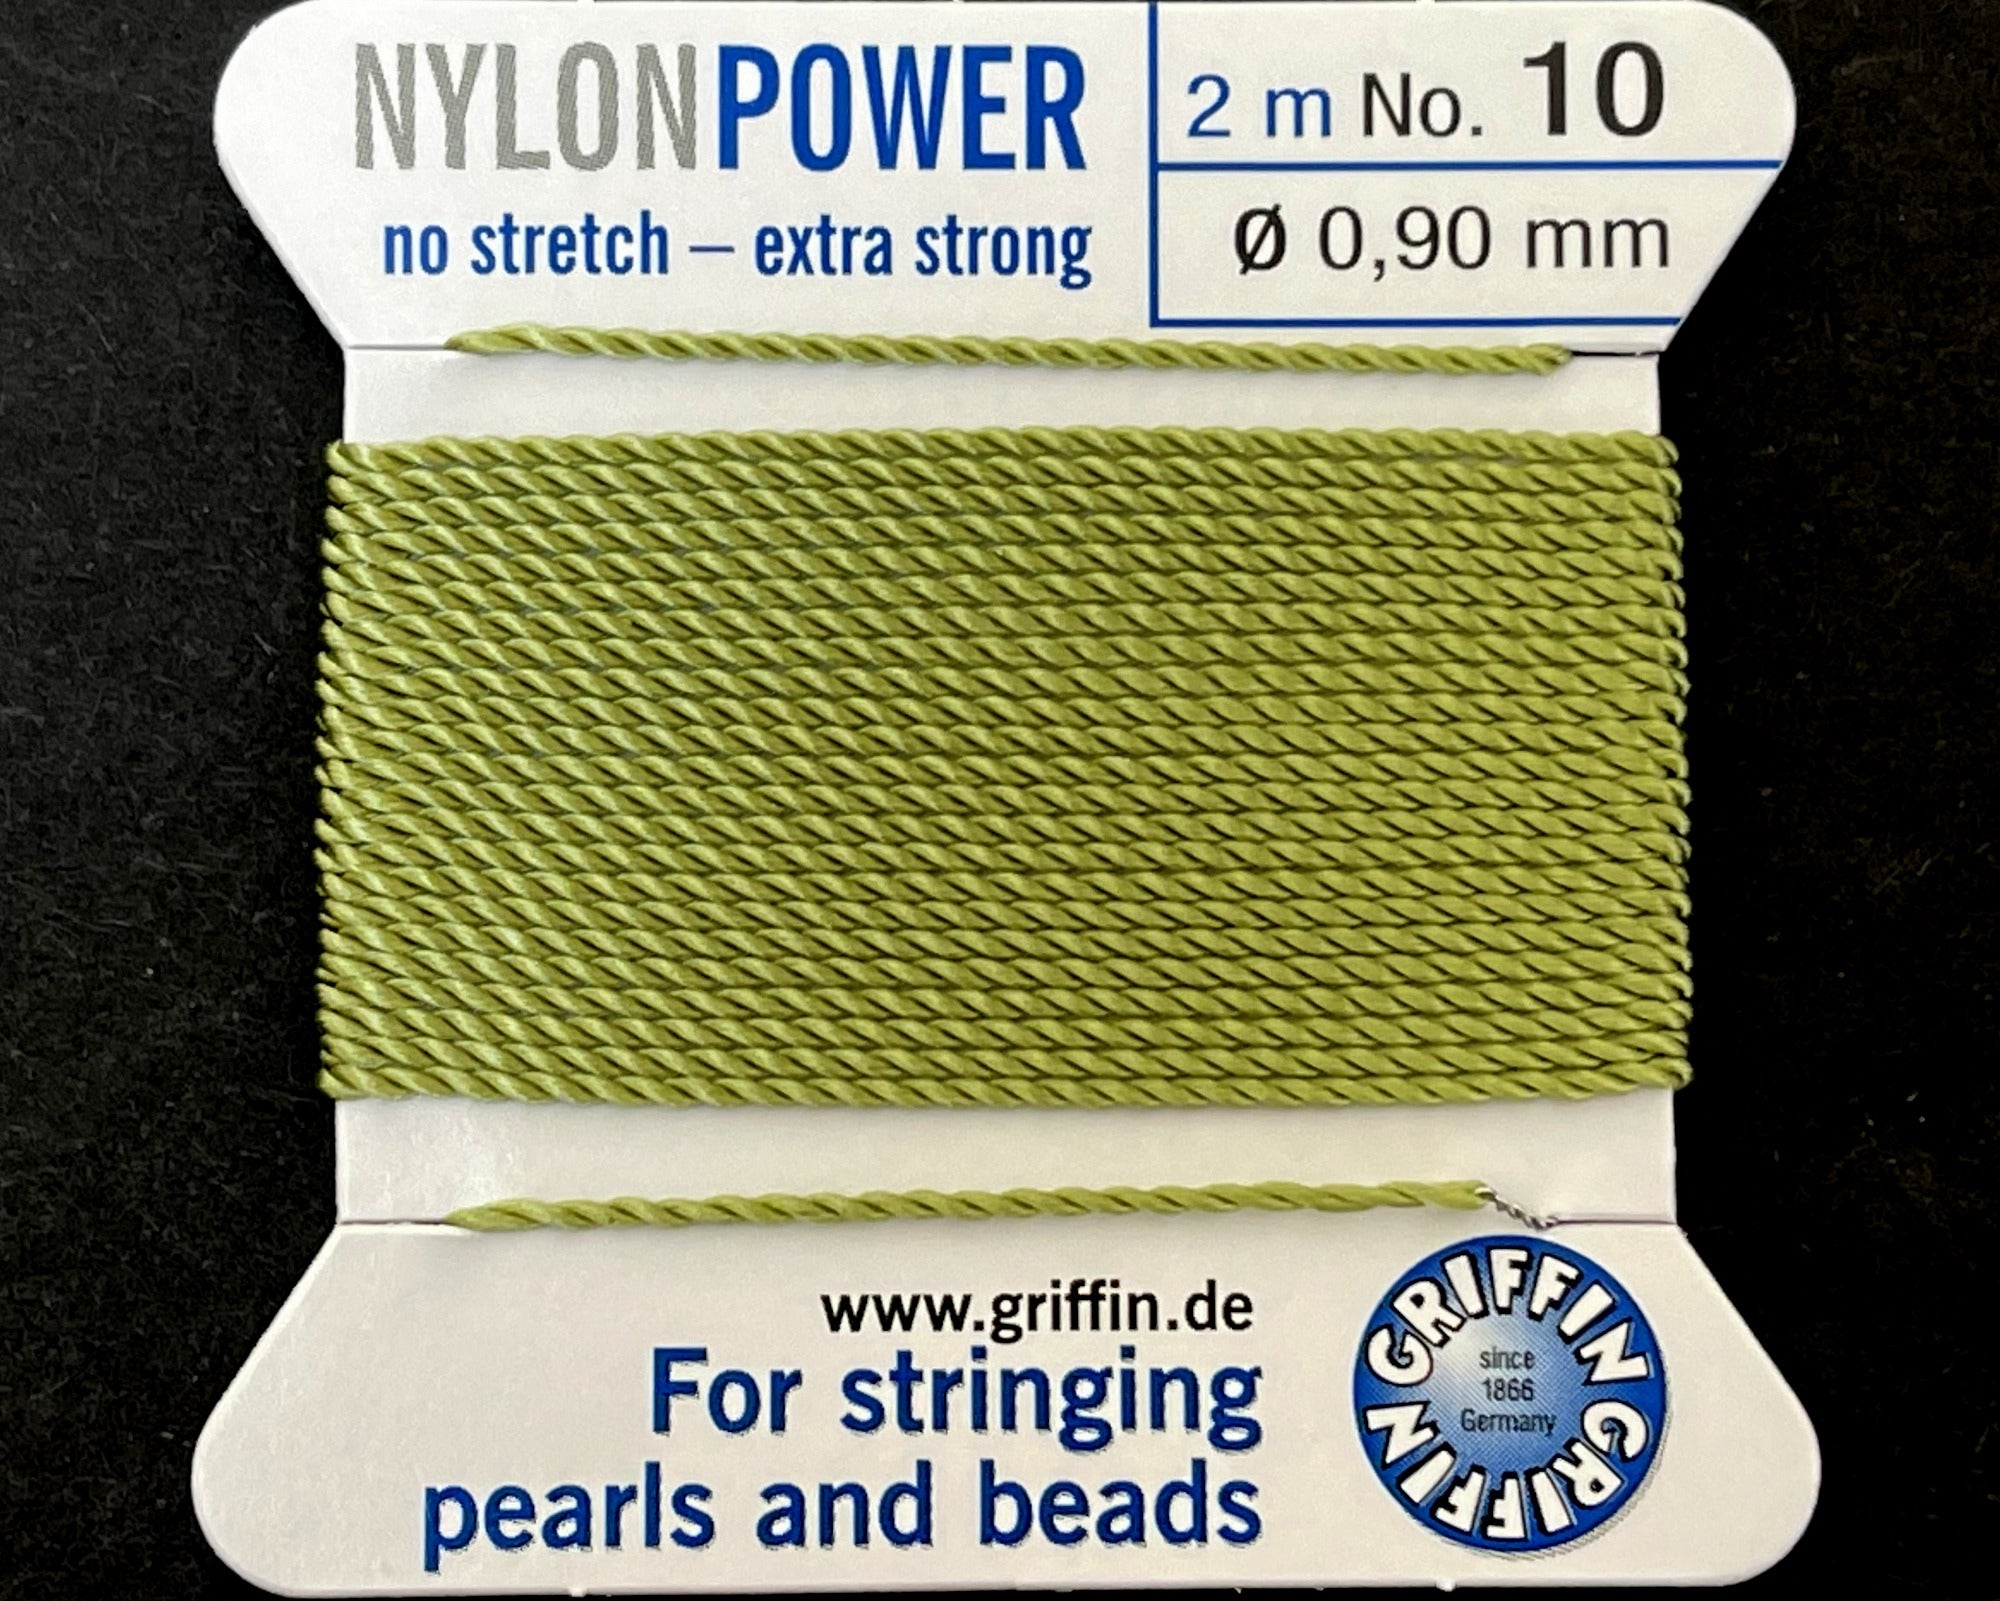 Griffin Nylon Power beading cord with needle, size #10 - 0.9mm, 2 metre